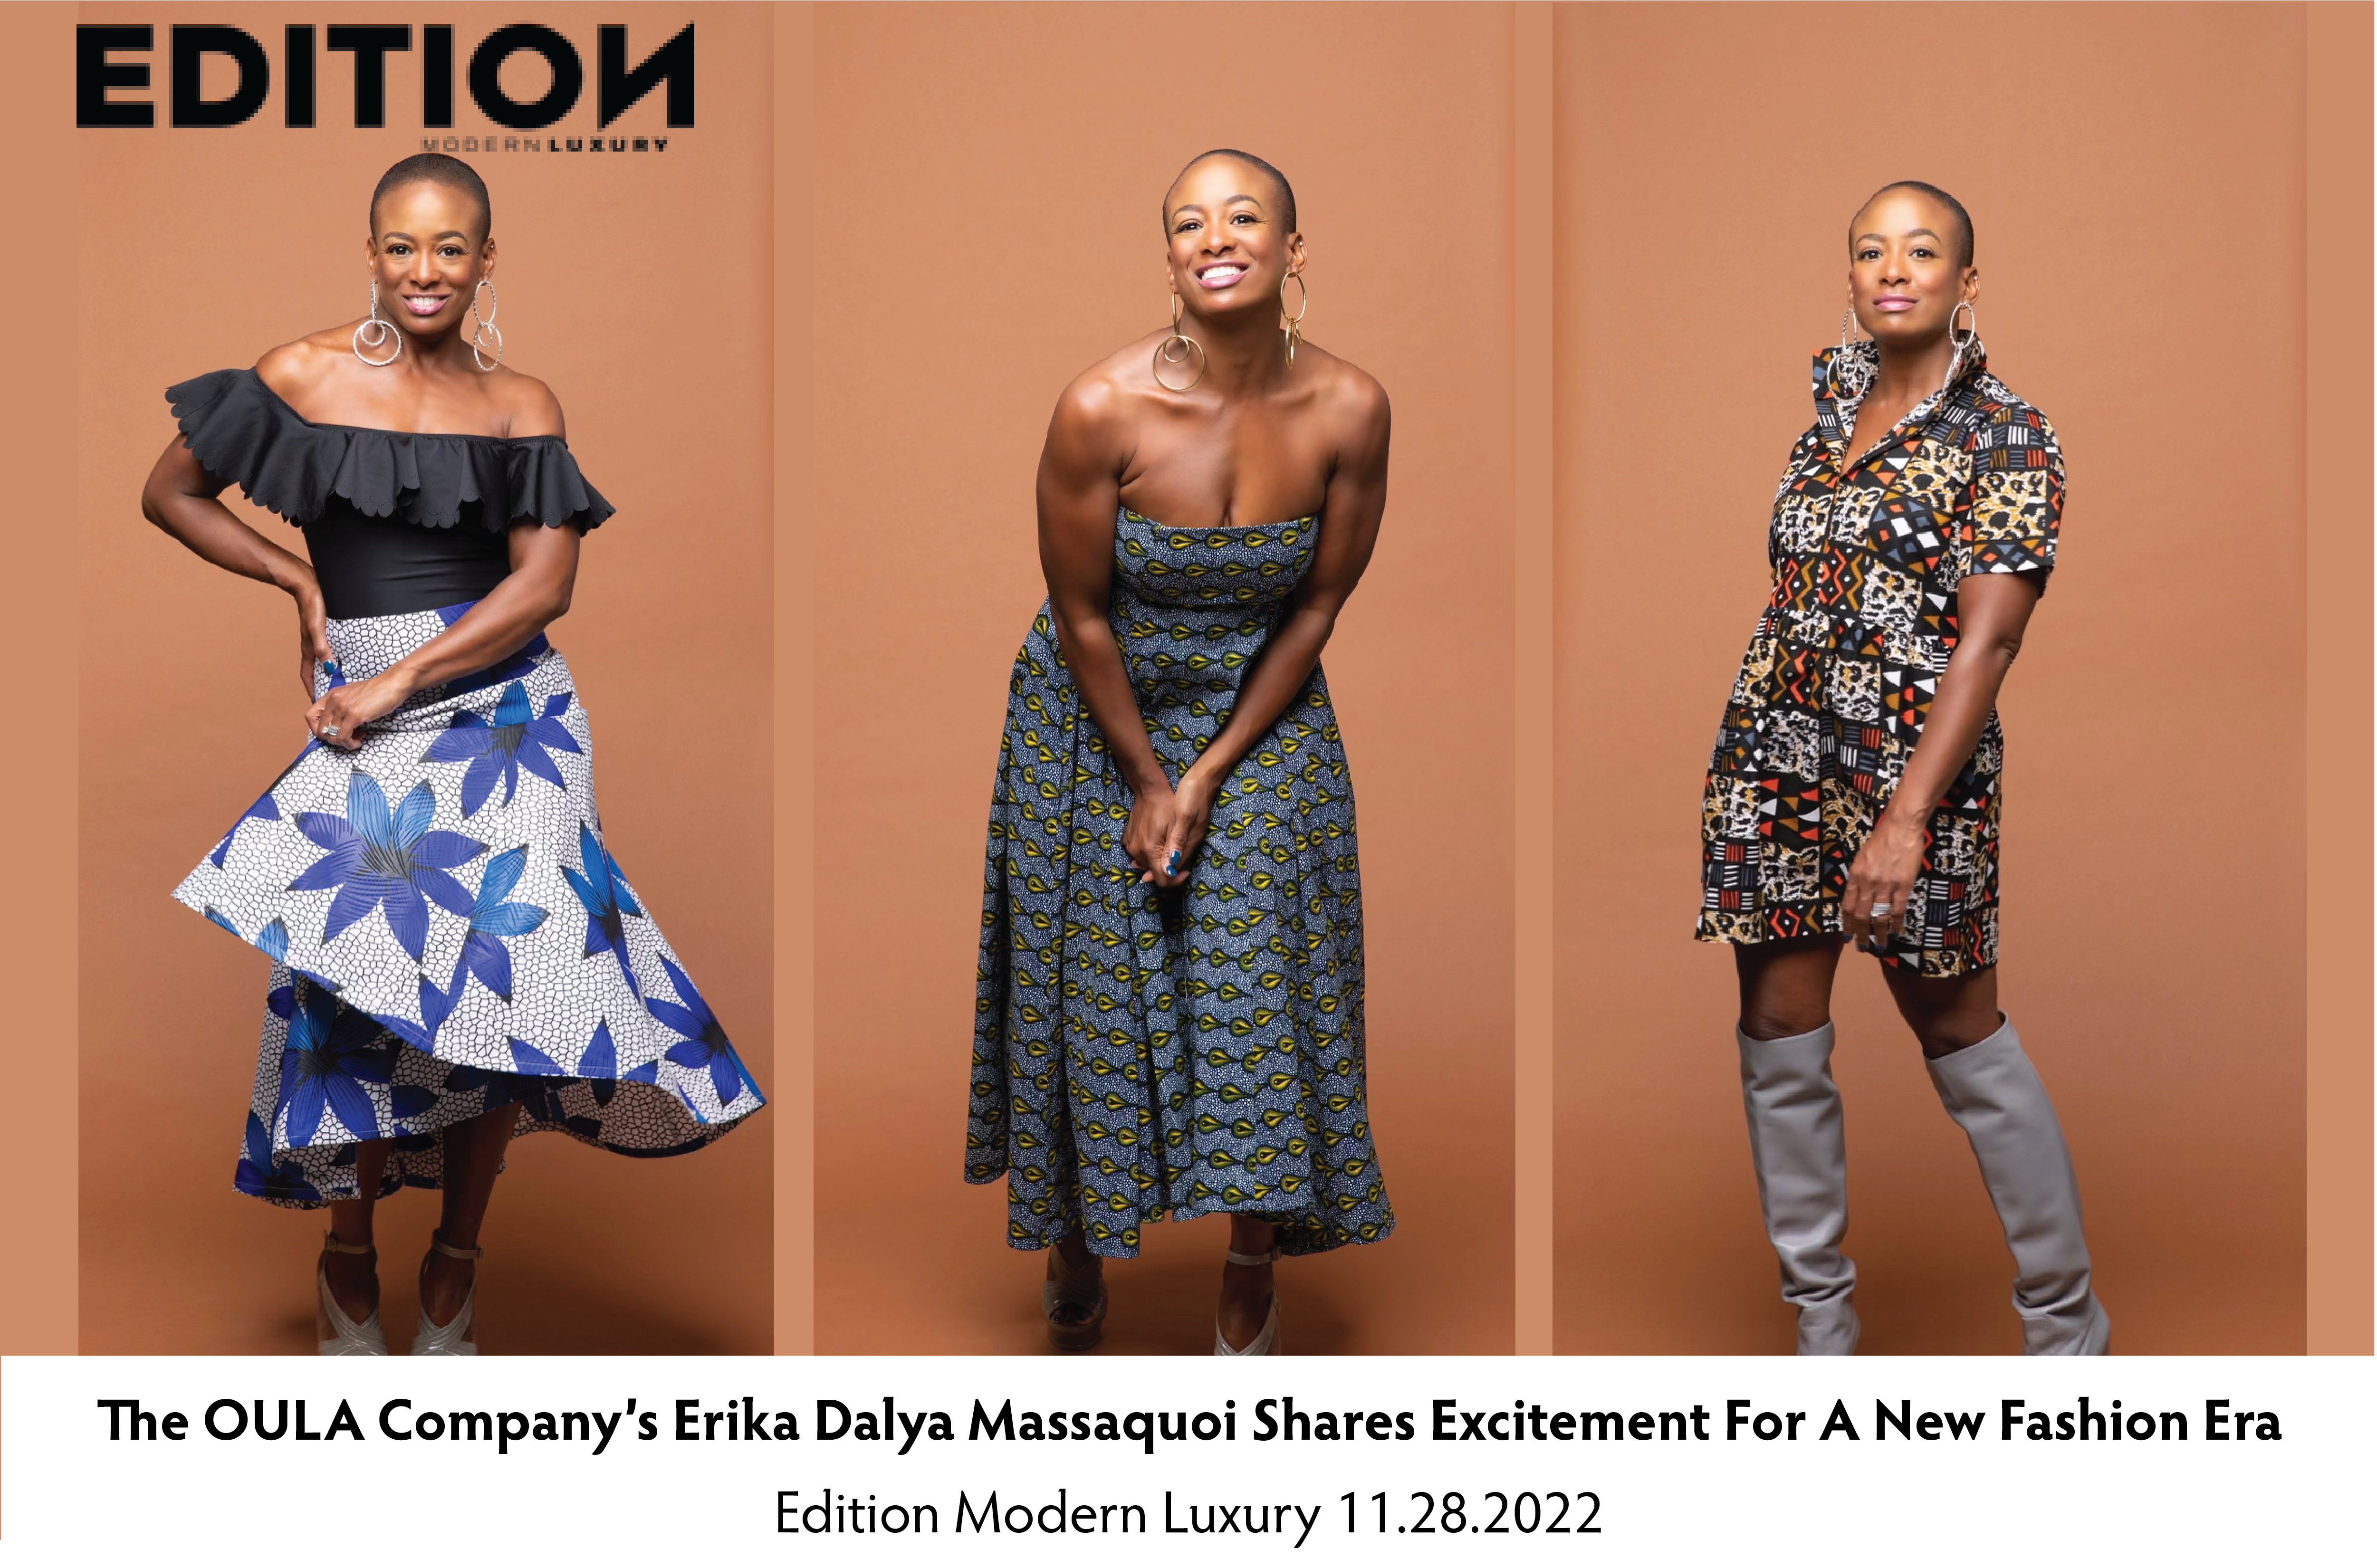 The OULA Company's Erika Dalya Massaquoi Shares Excitement For A New Fashion Era in Edition Modern Luxury